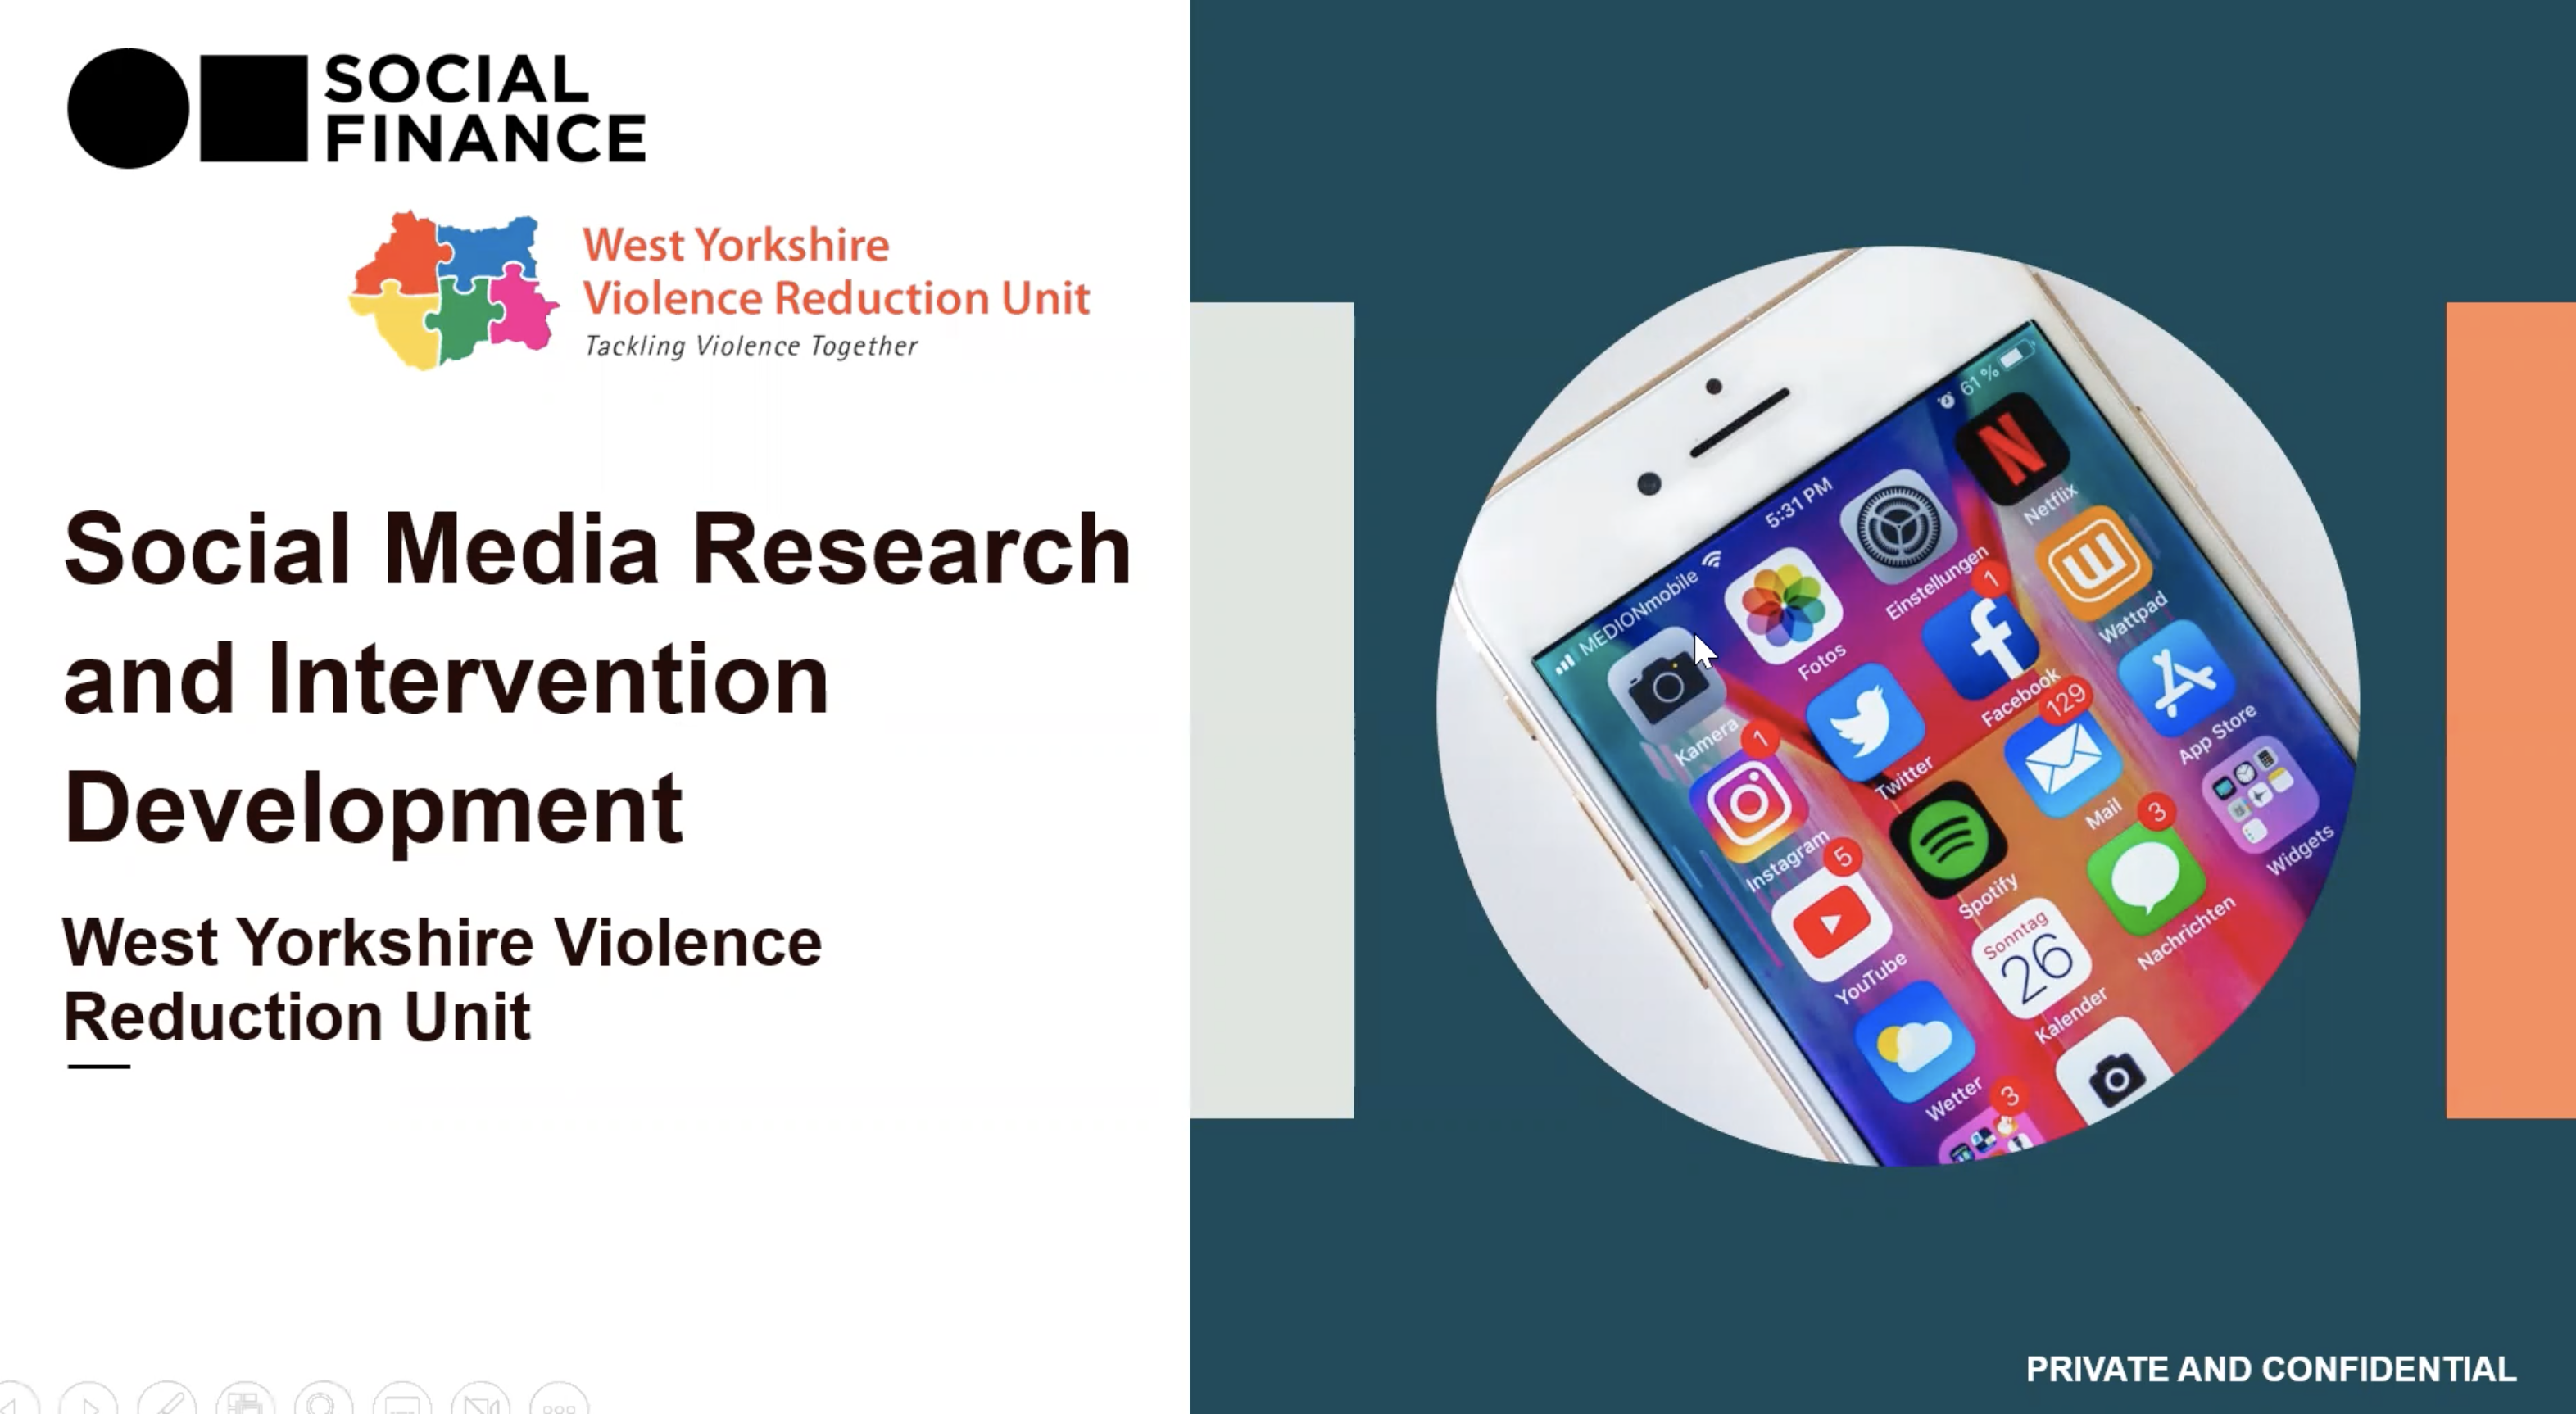 Social Media Research and Intervention Development - West Yorkshire Violence Reduction Unit